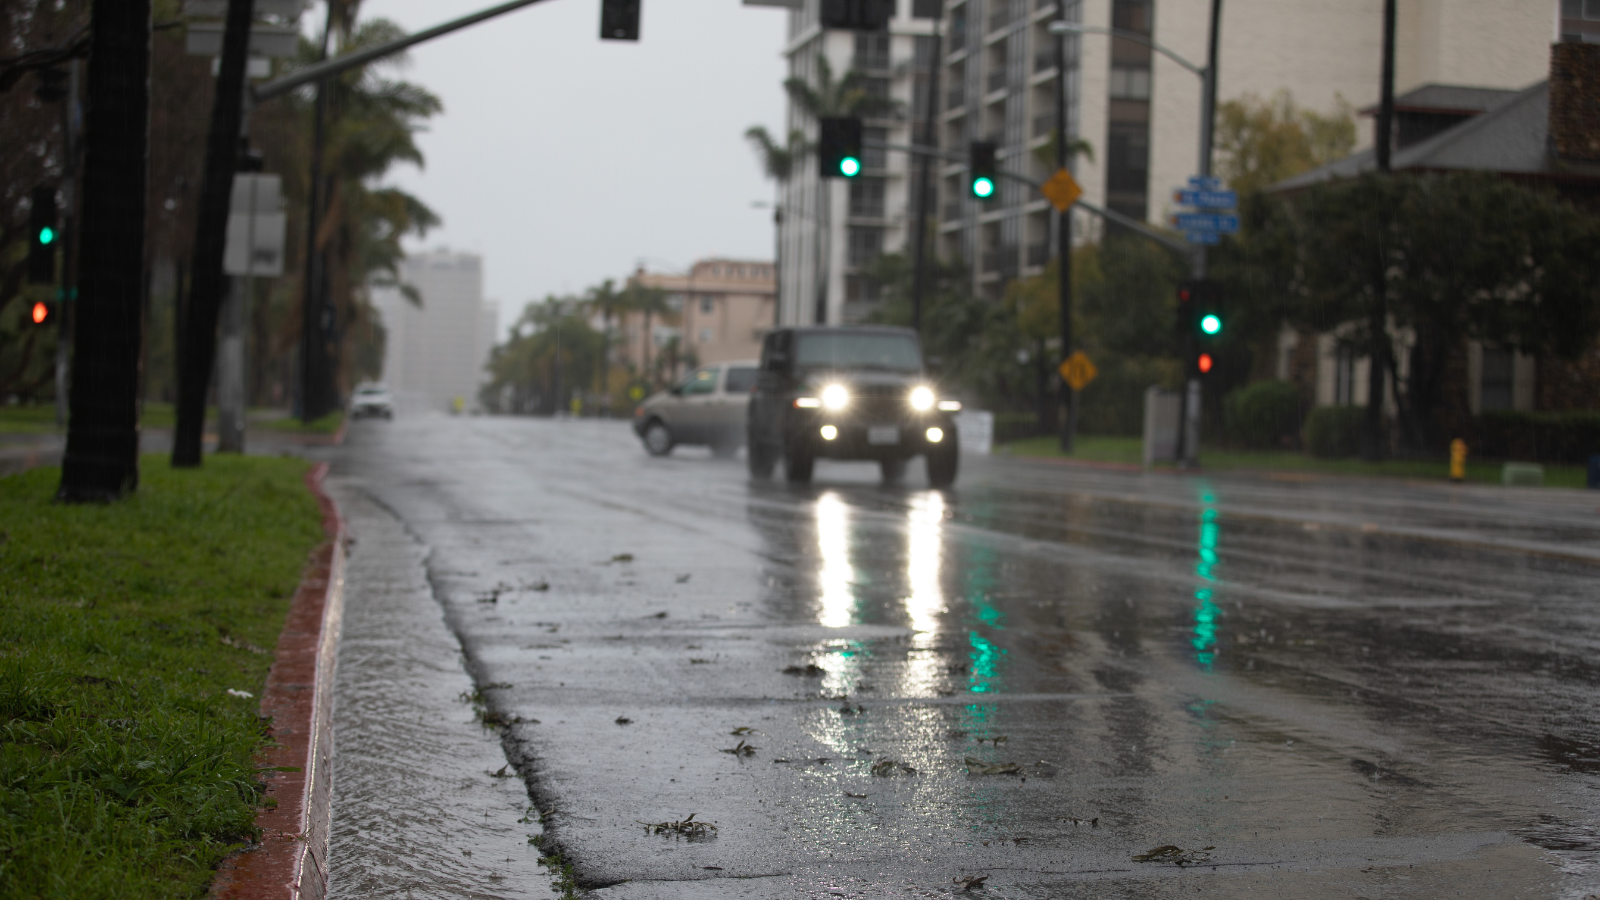 a jeep driving on a wet street from rain